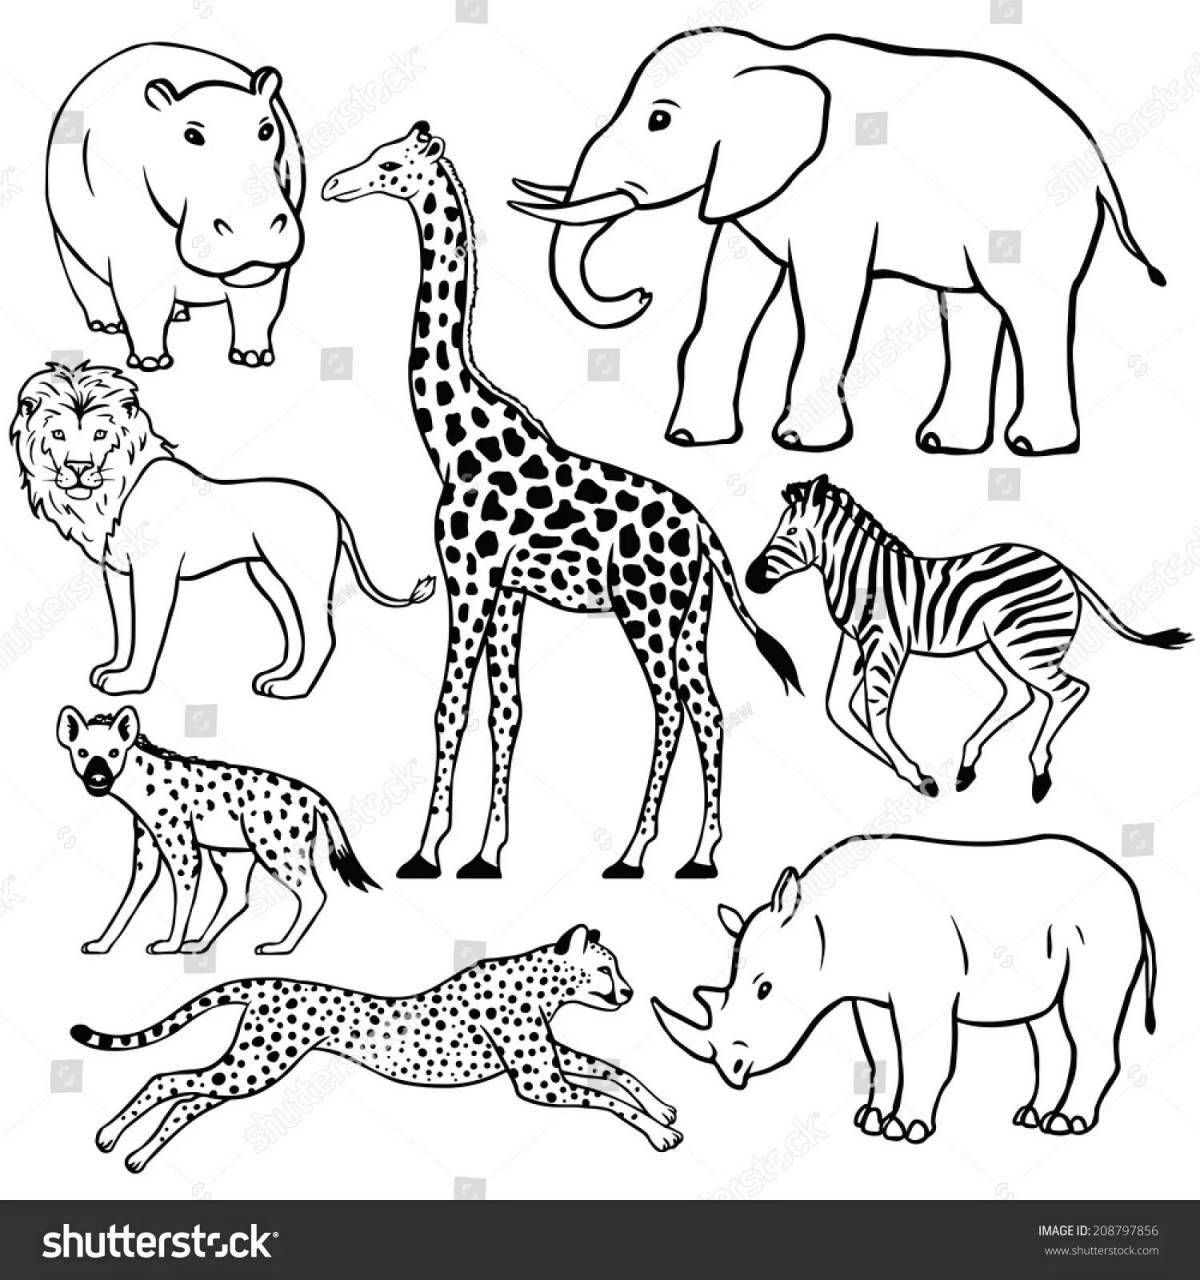 Funny coloring pages animals of hot and cold countries for preschoolers